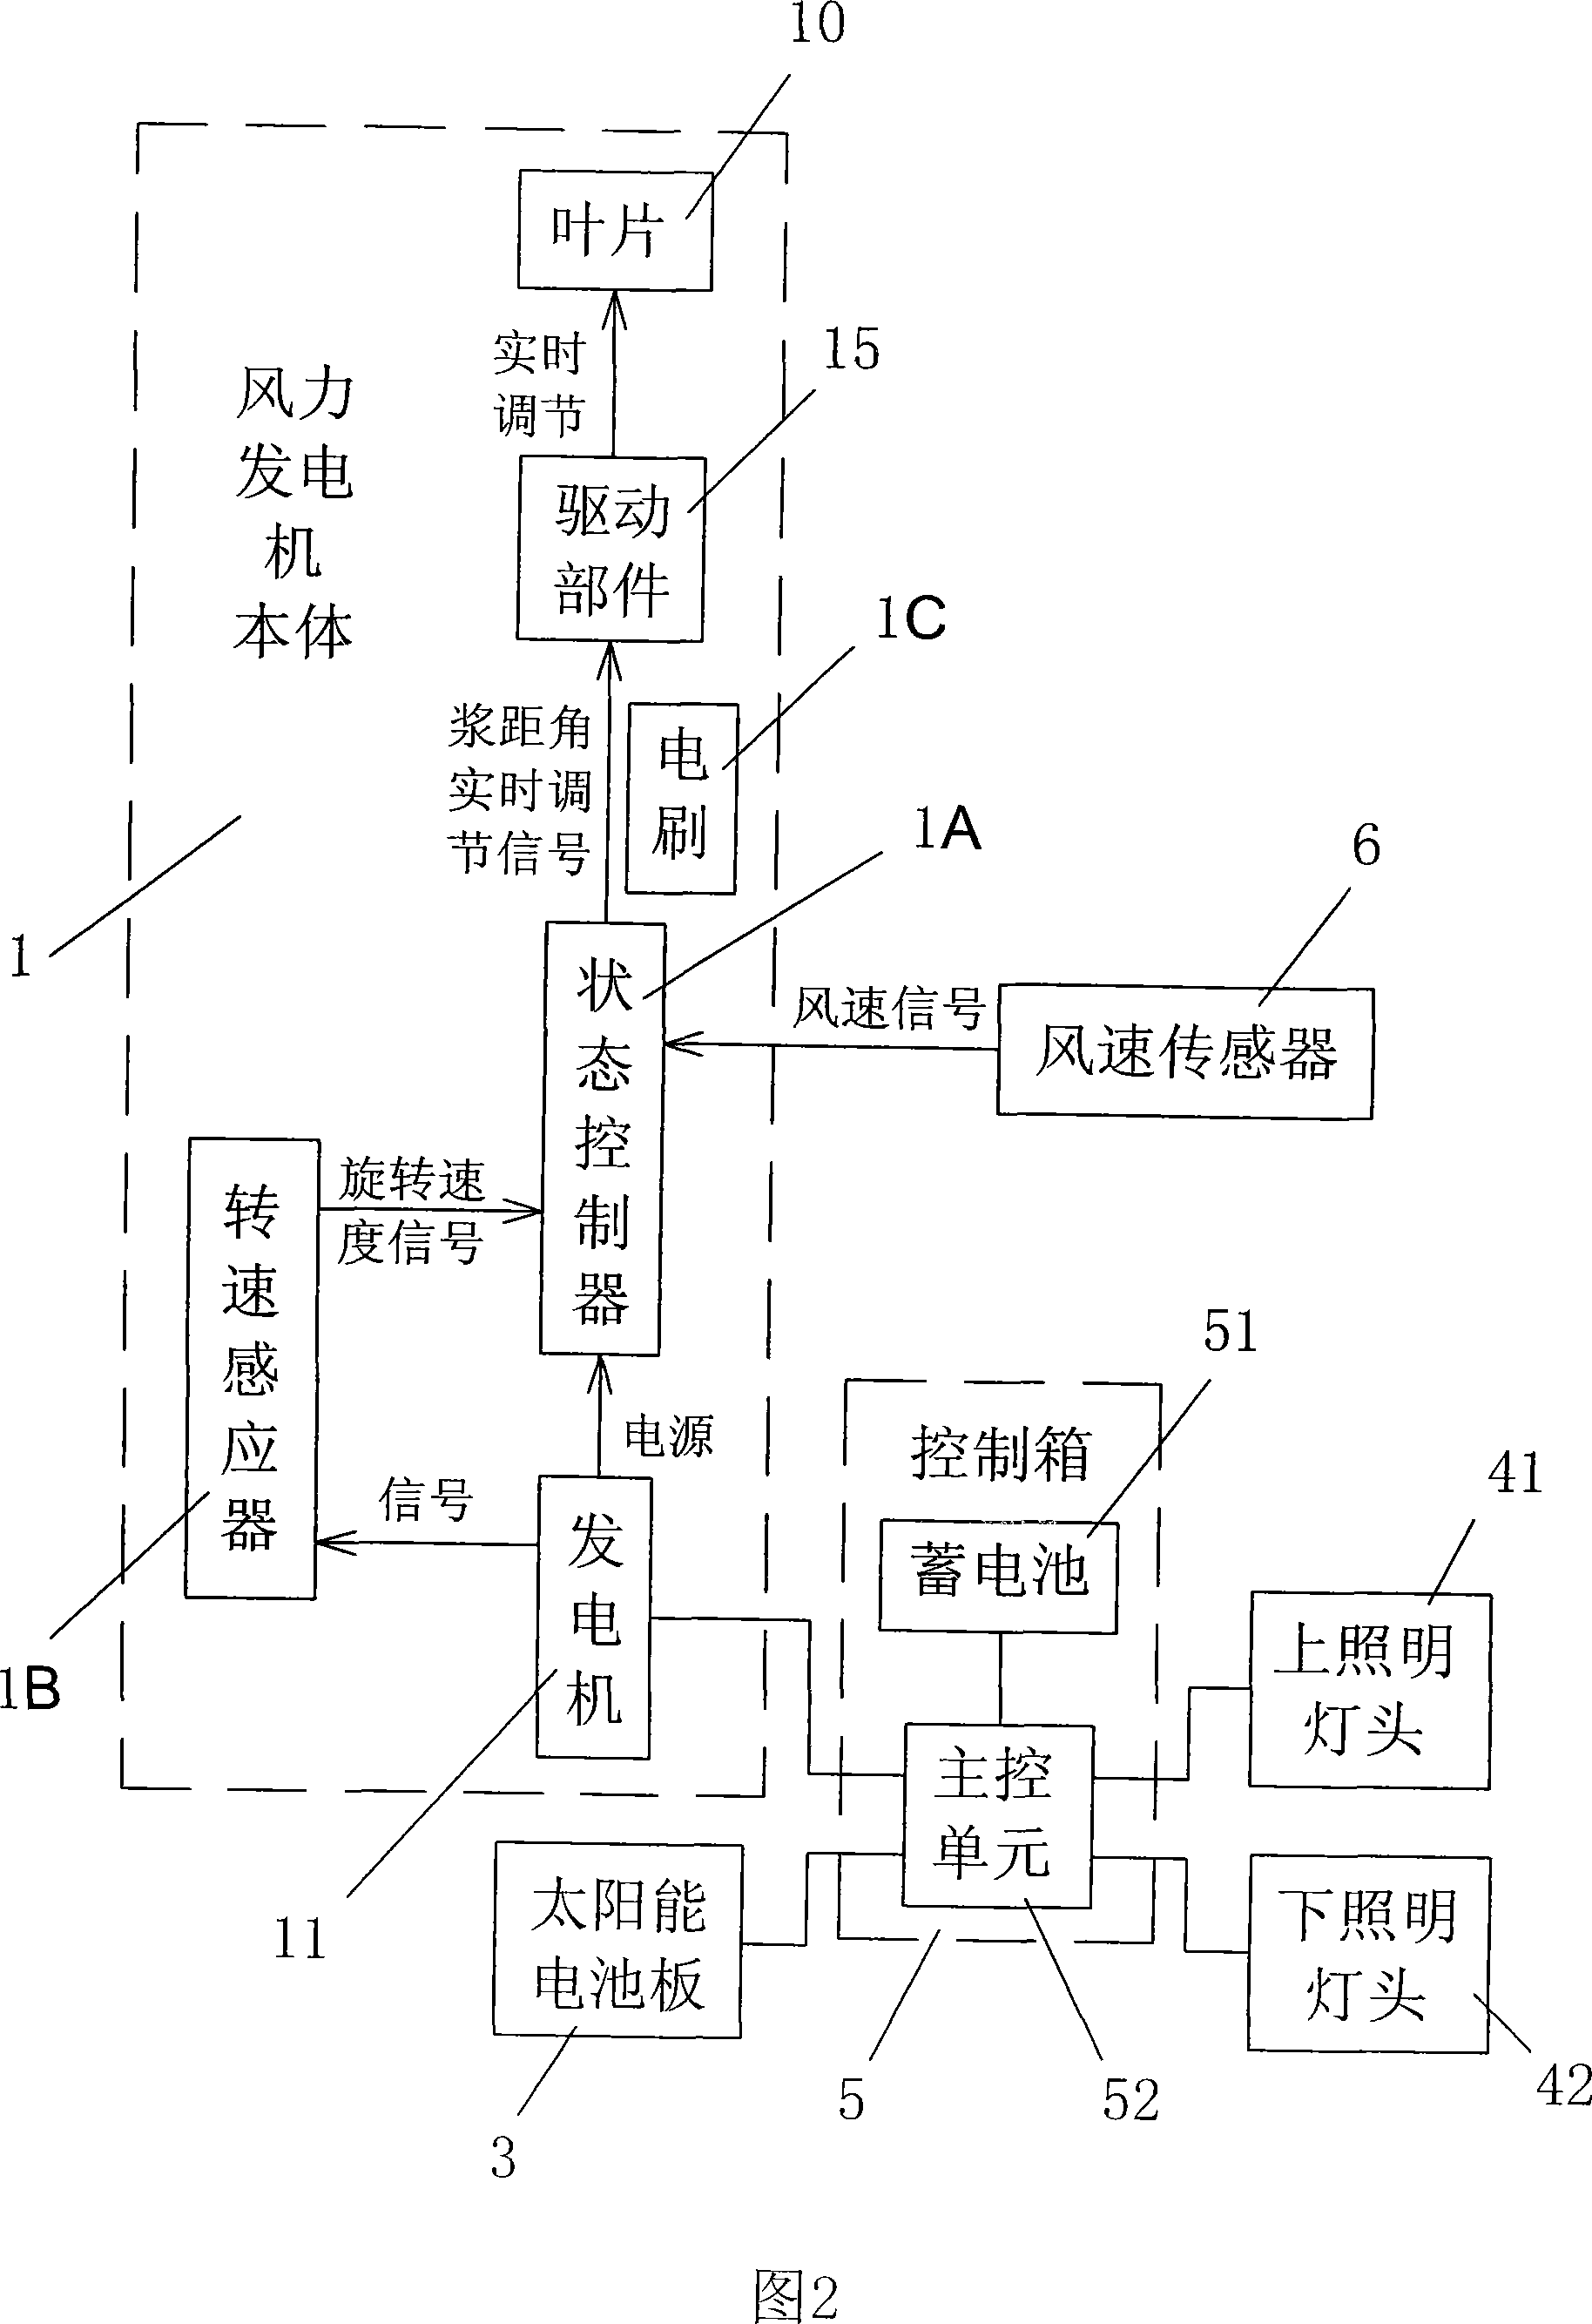 Wind-driven generator and wind and light supplementary solar energy application system